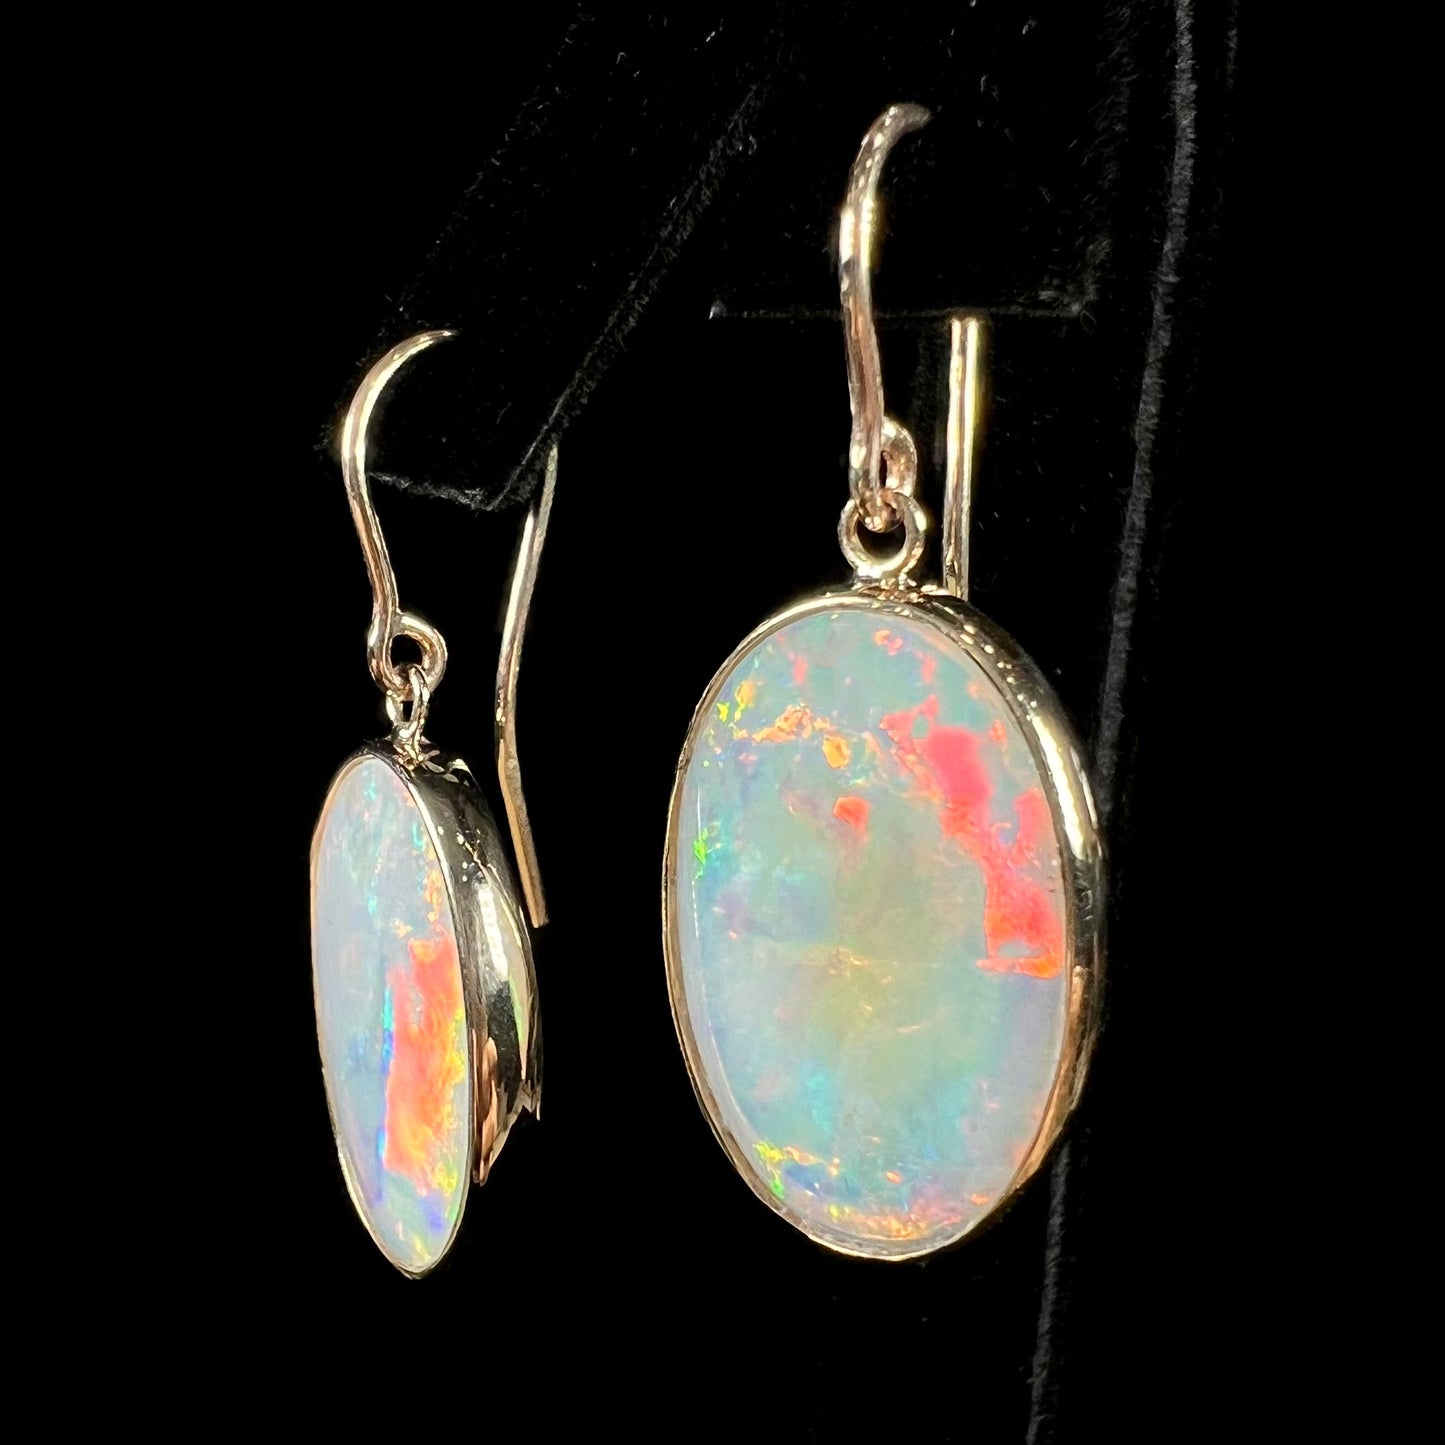 A pair of yellow gold earrings bezel set with oval cabochon cut natural opal stones.